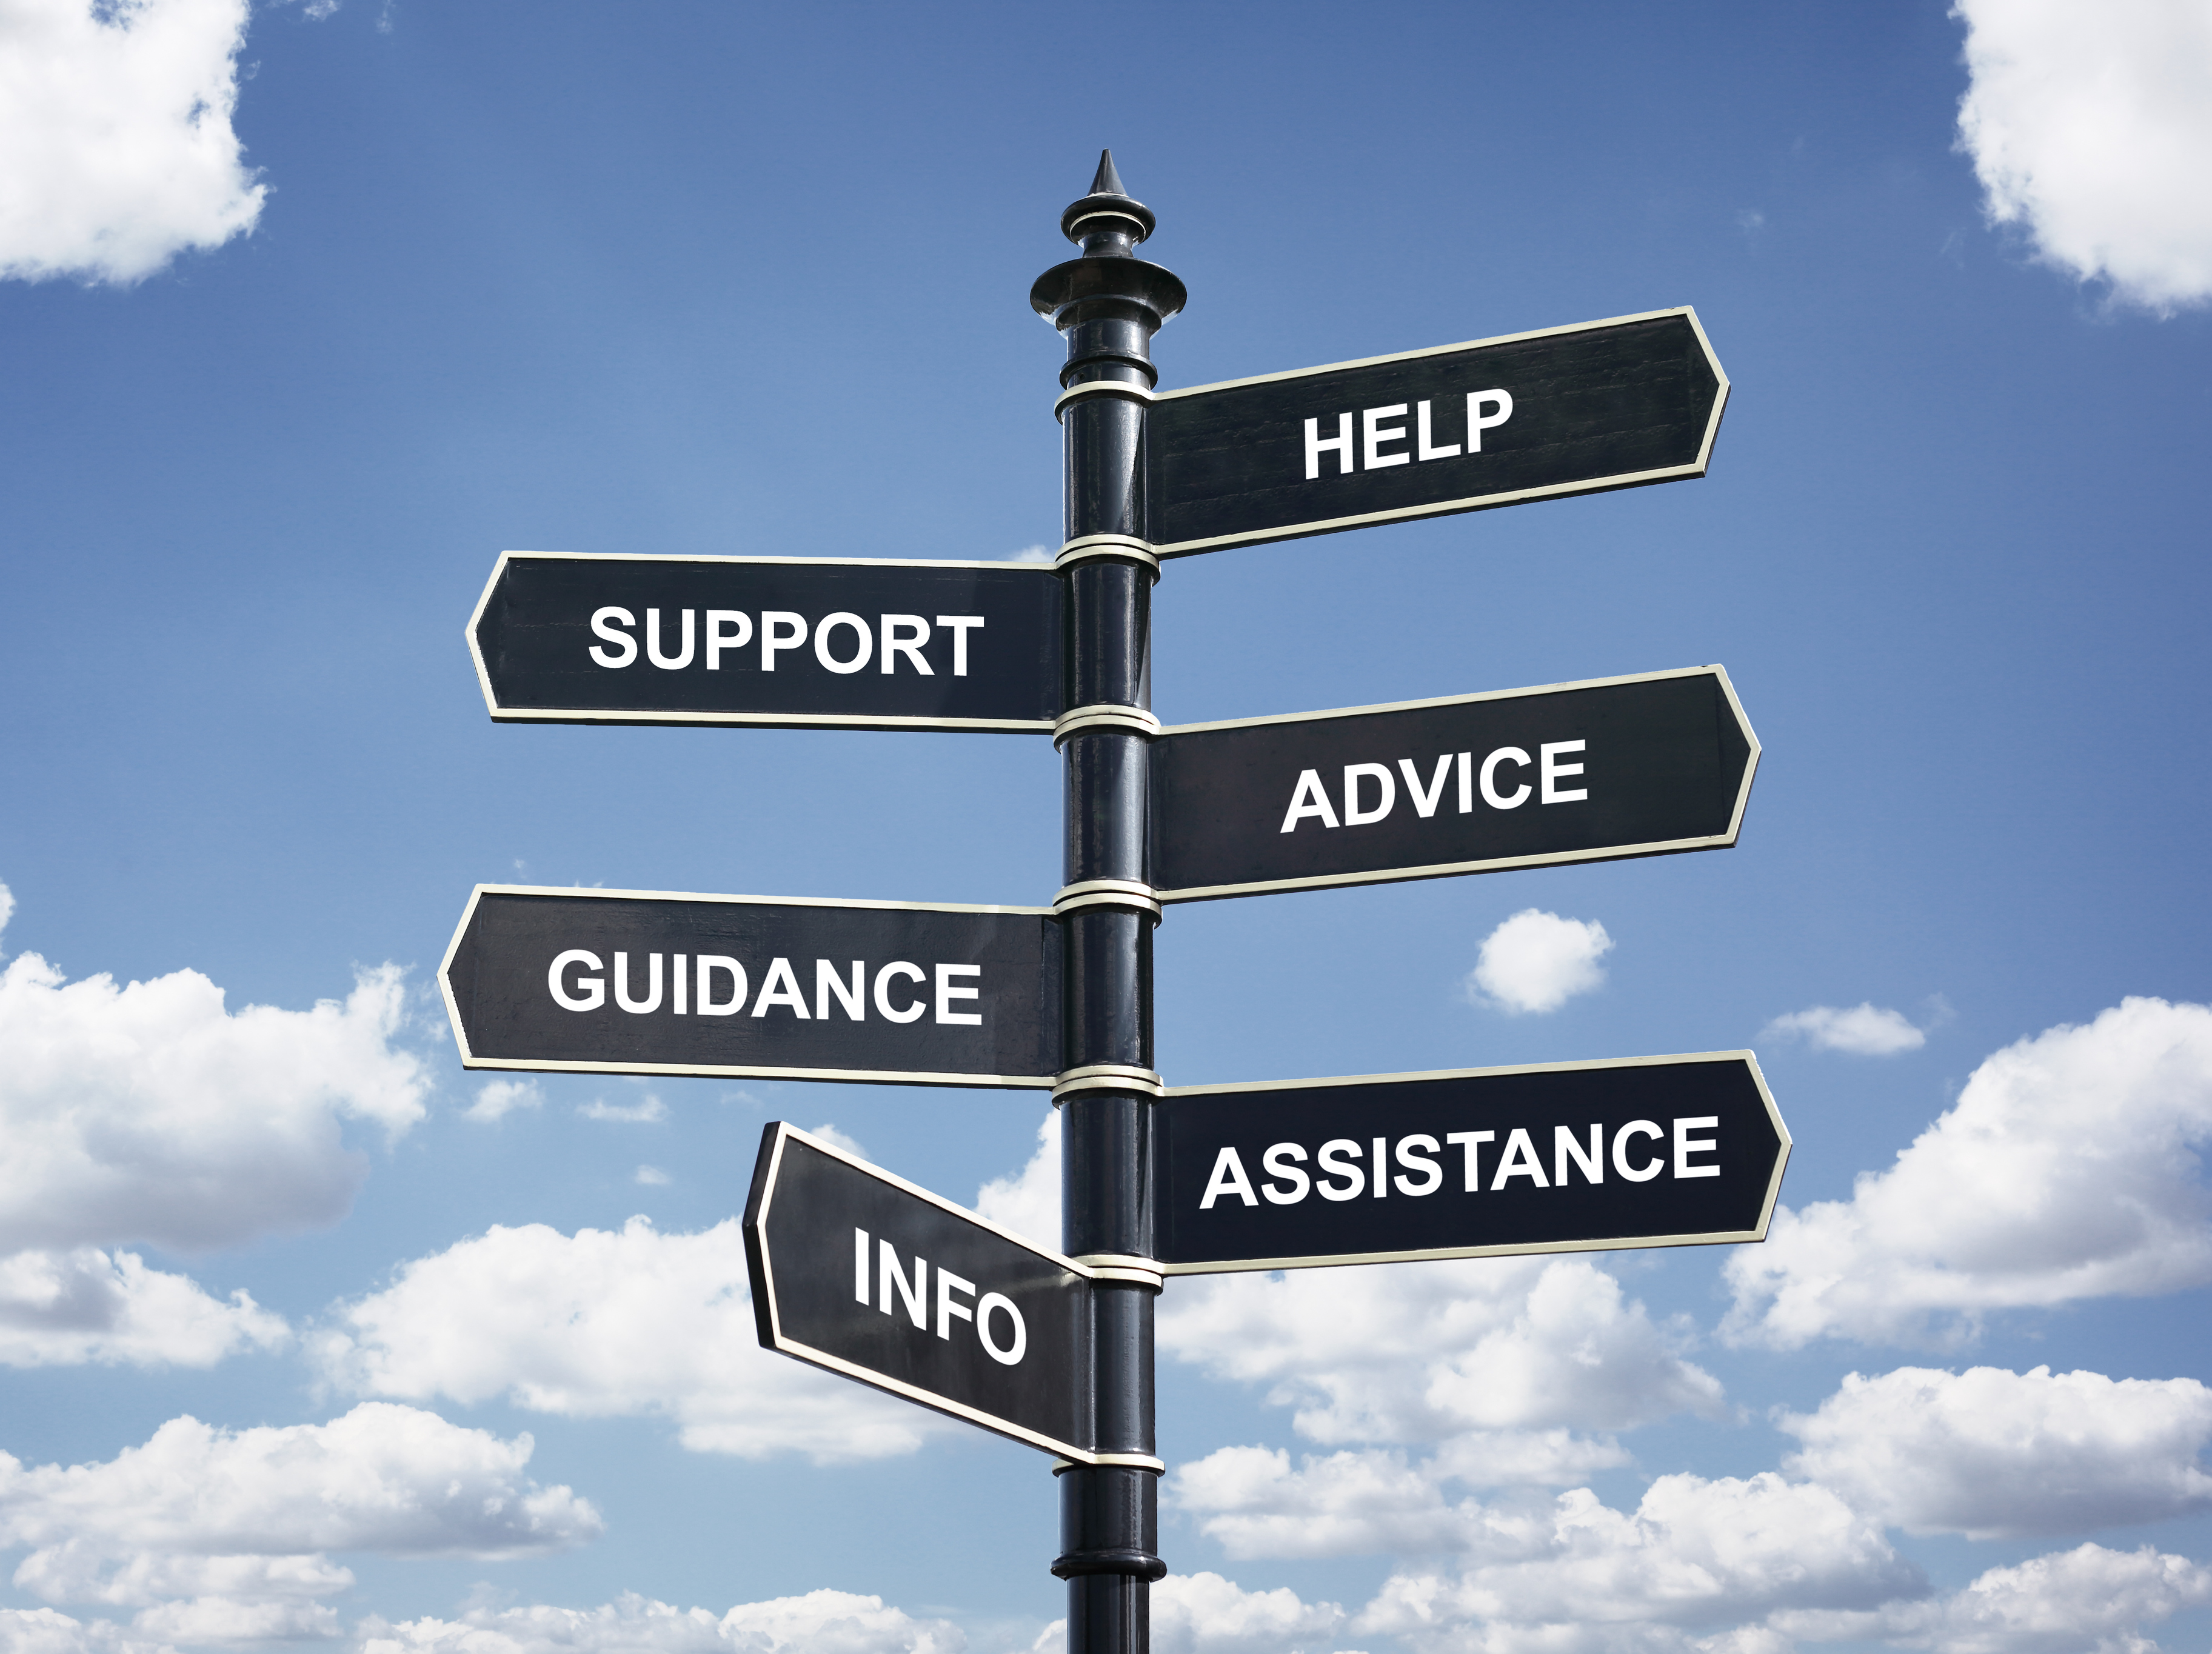 Help, support, advice, guidance, assistance and info crossroad signpost business concept